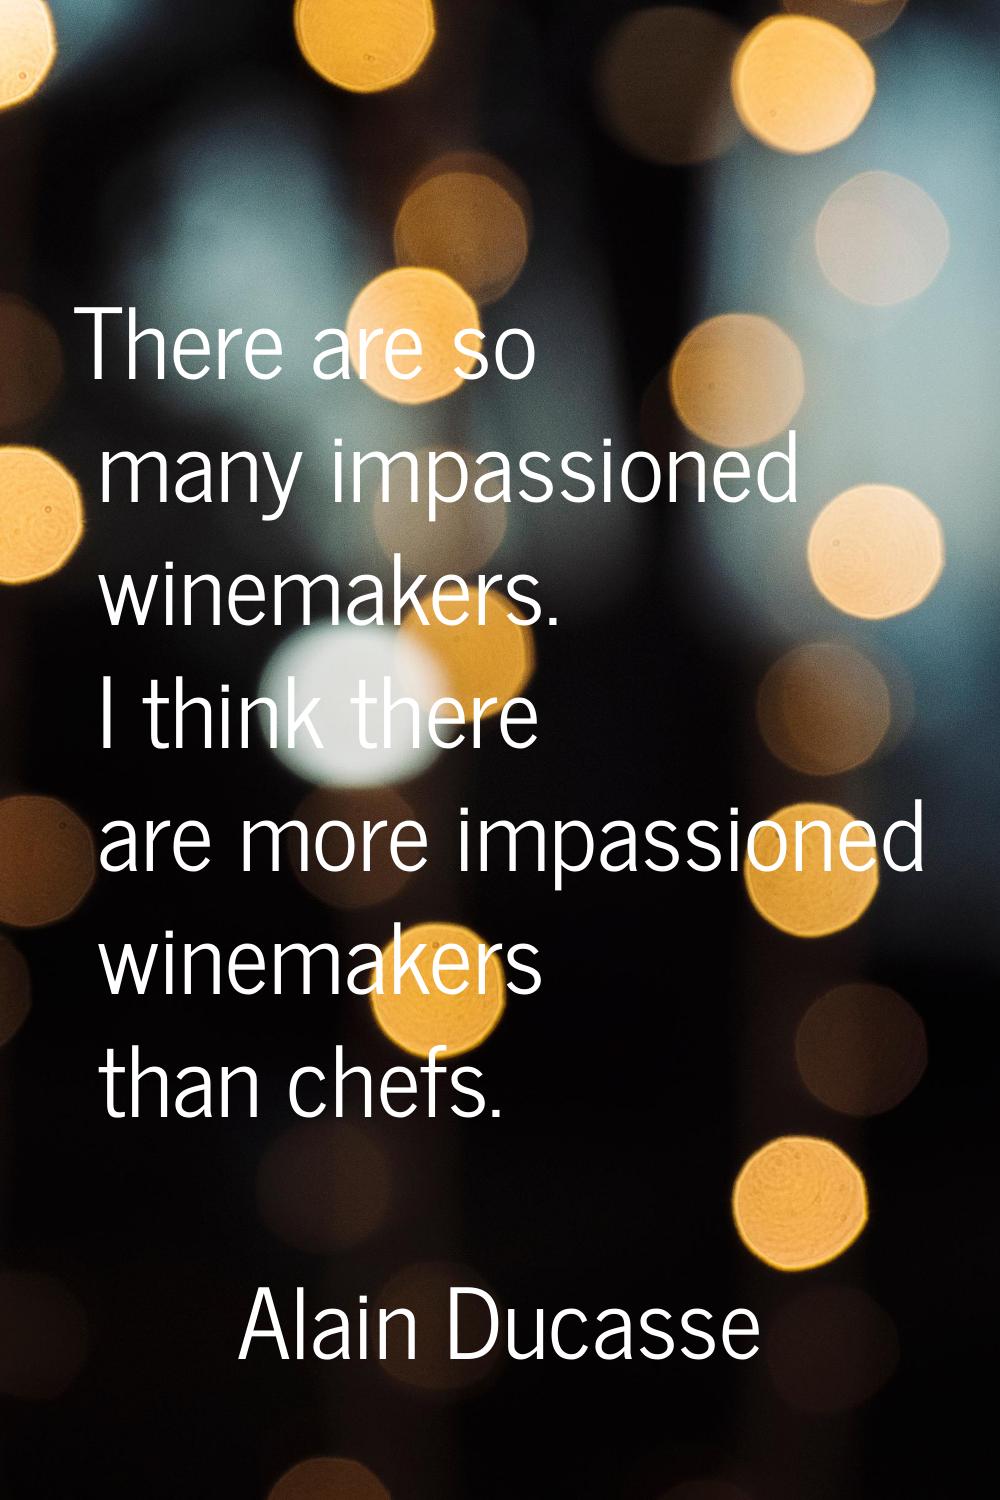 There are so many impassioned winemakers. I think there are more impassioned winemakers than chefs.